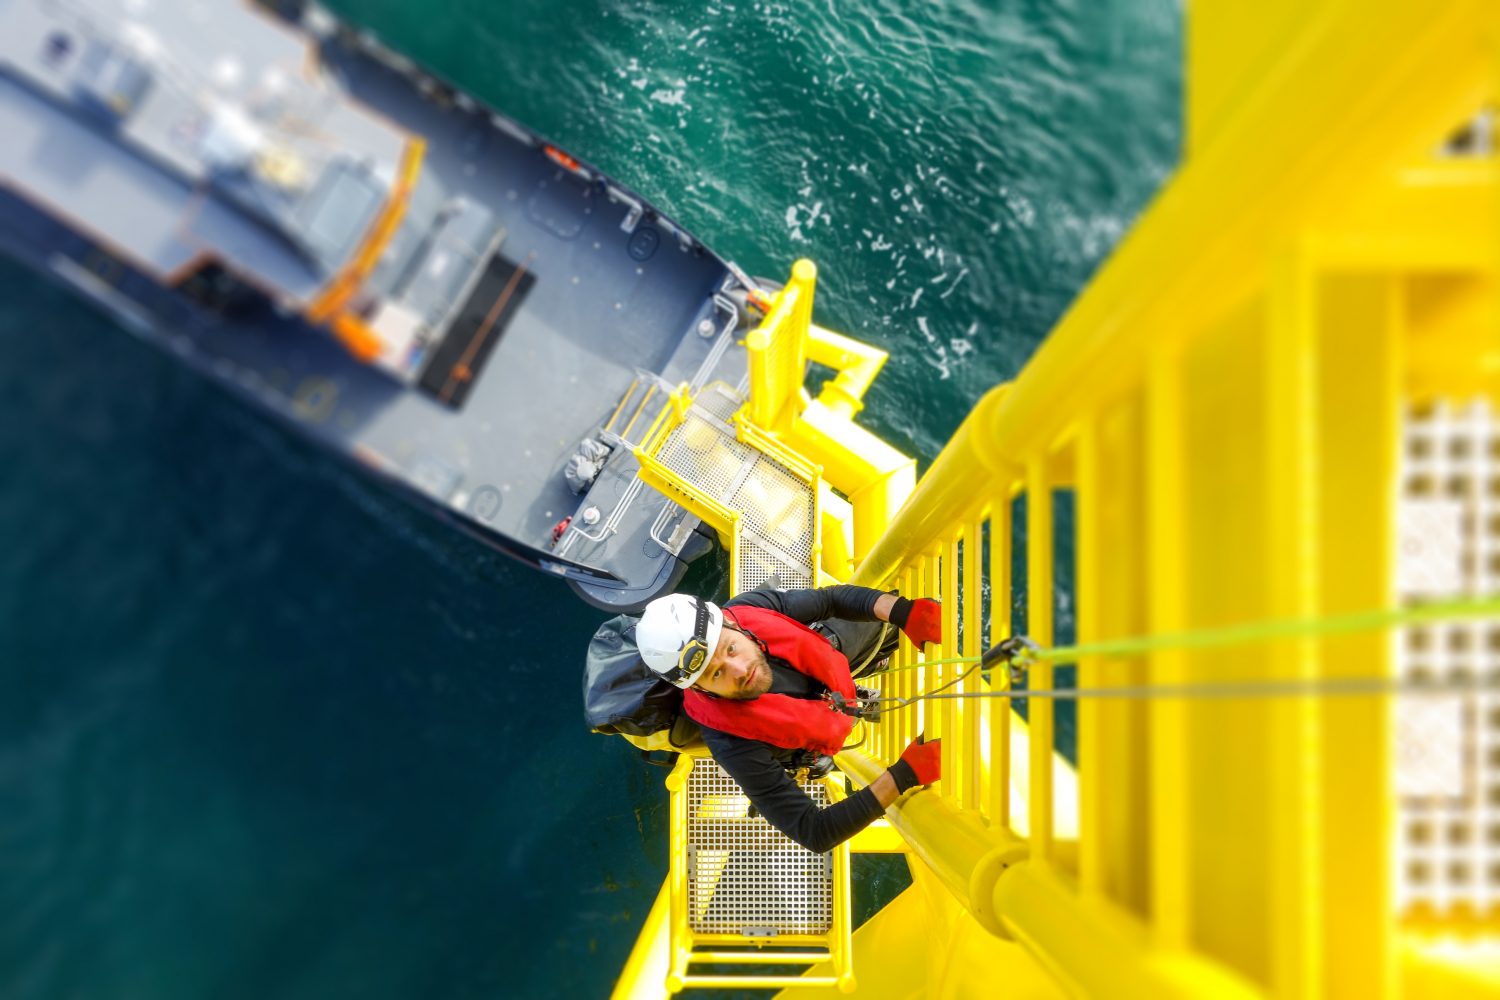 Wind-turbine, offshore, worker, climbing, high up, boat, sea